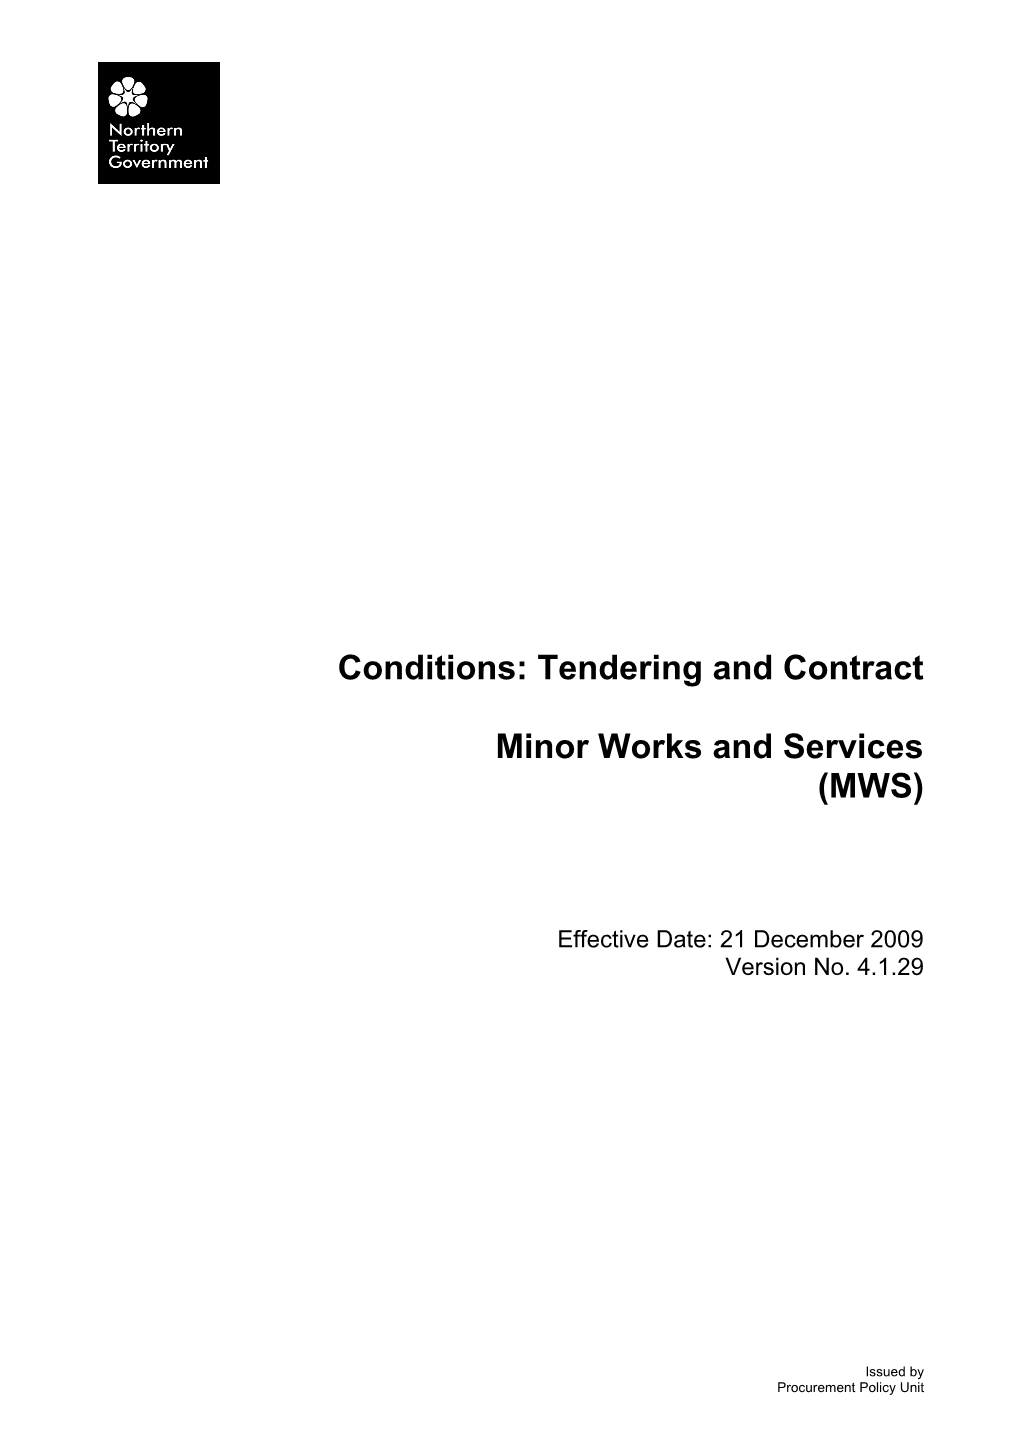 Conditions: Tendering and Contract MWS - (V 4.1.29) (21 December 2009)